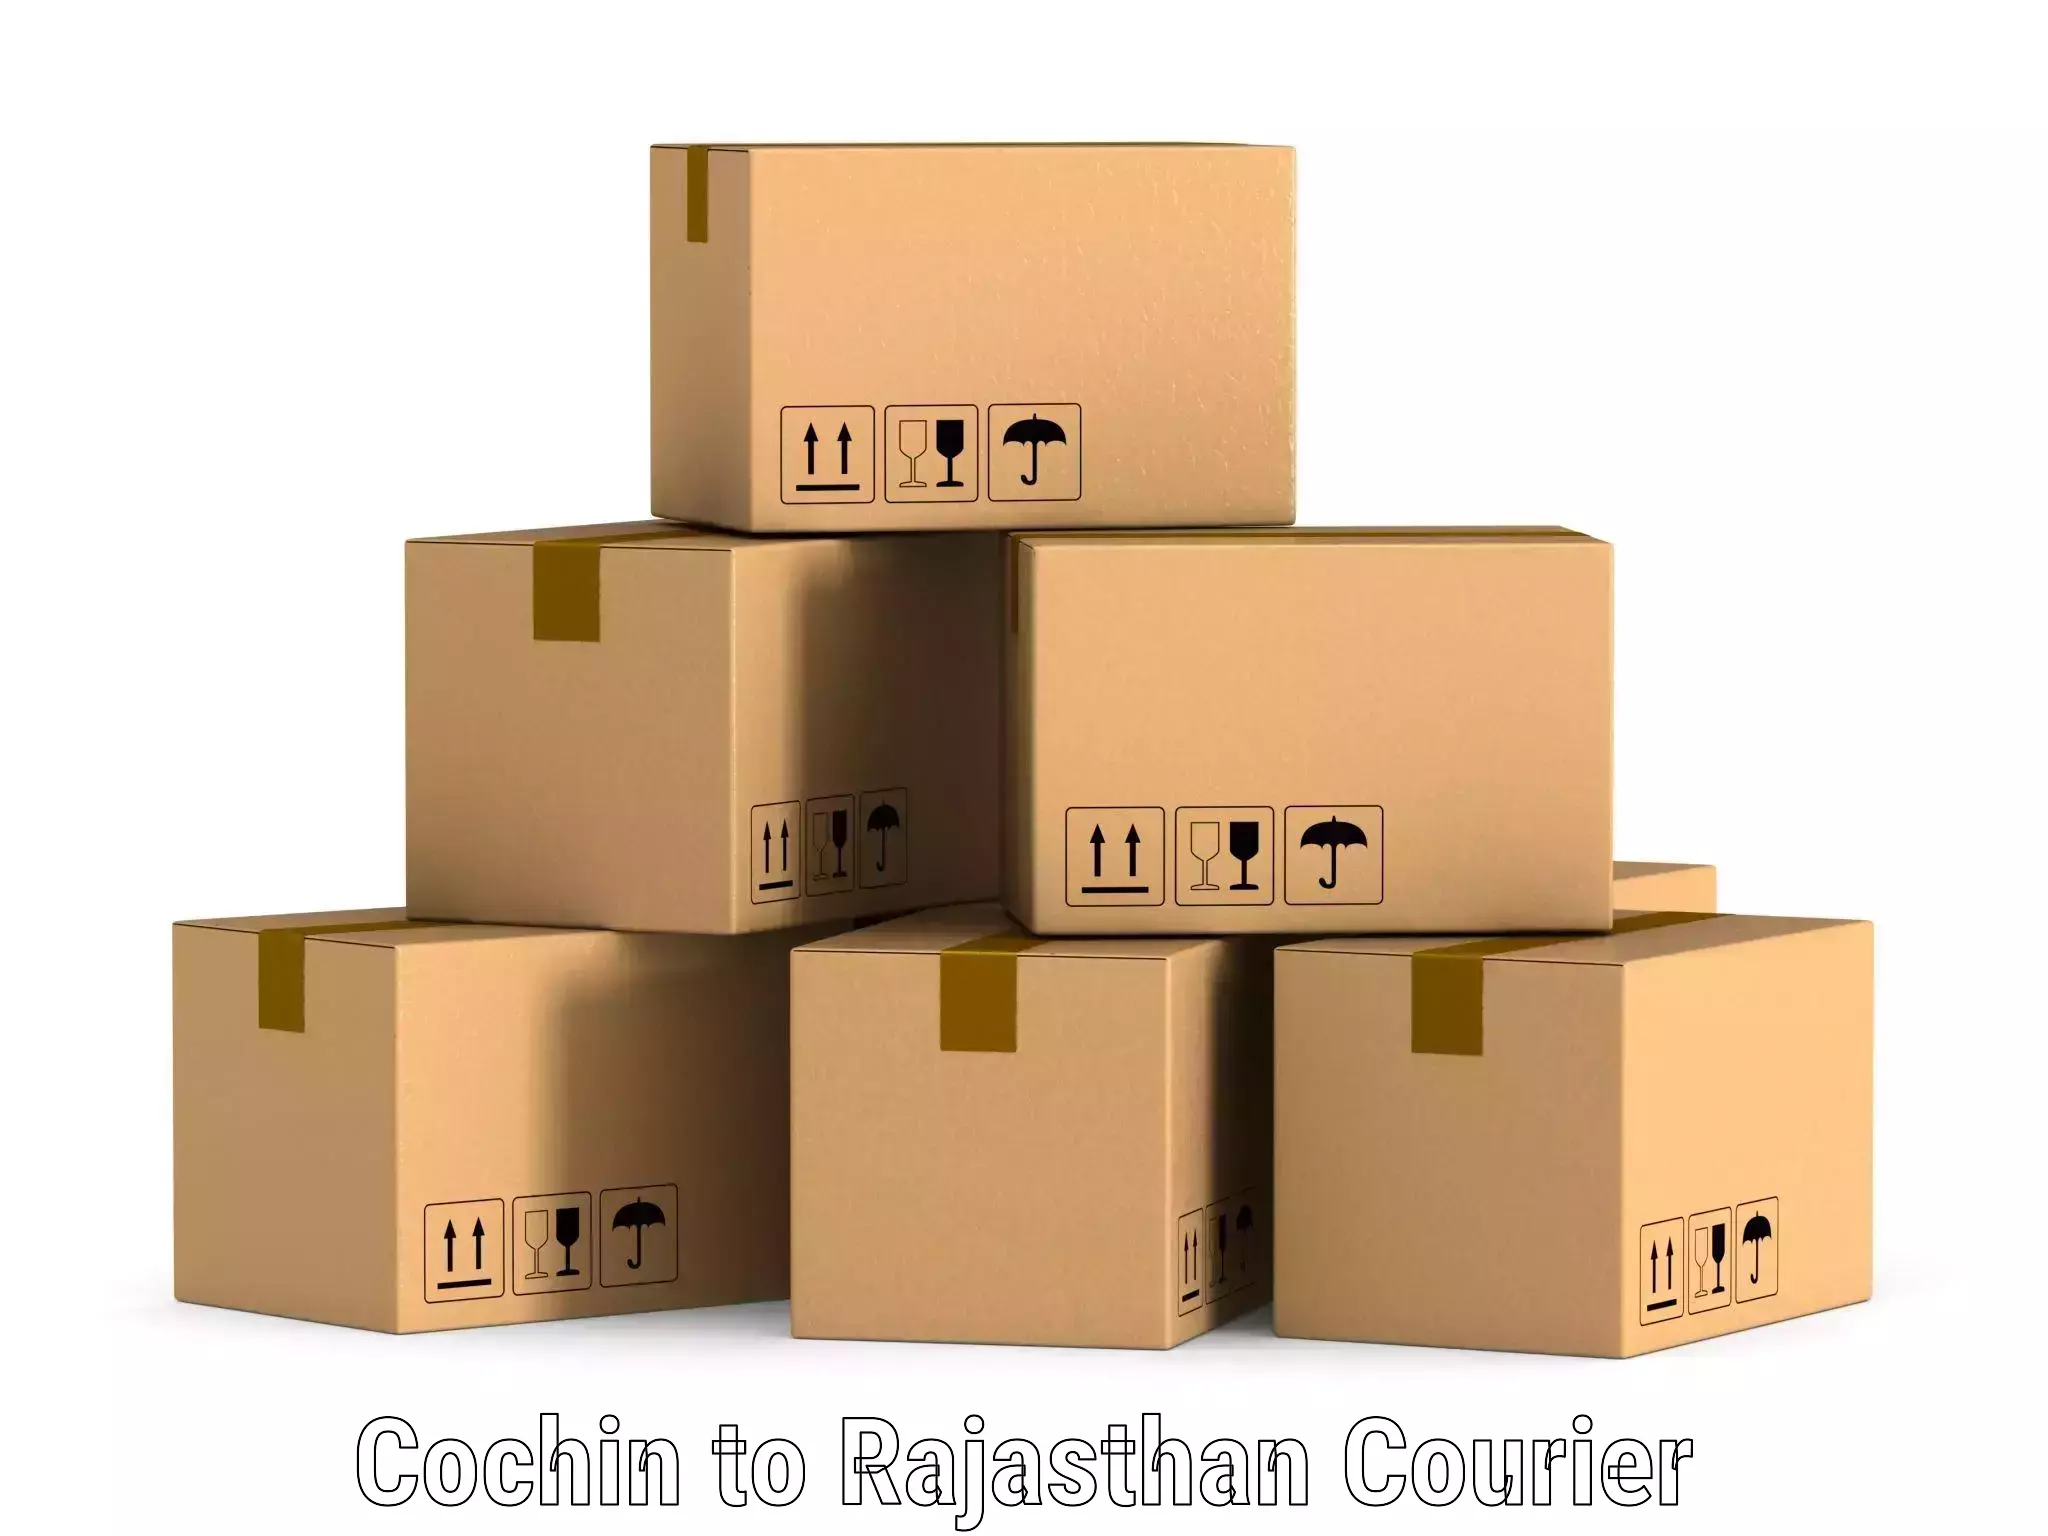 Multi-city courier Cochin to Rajasthan